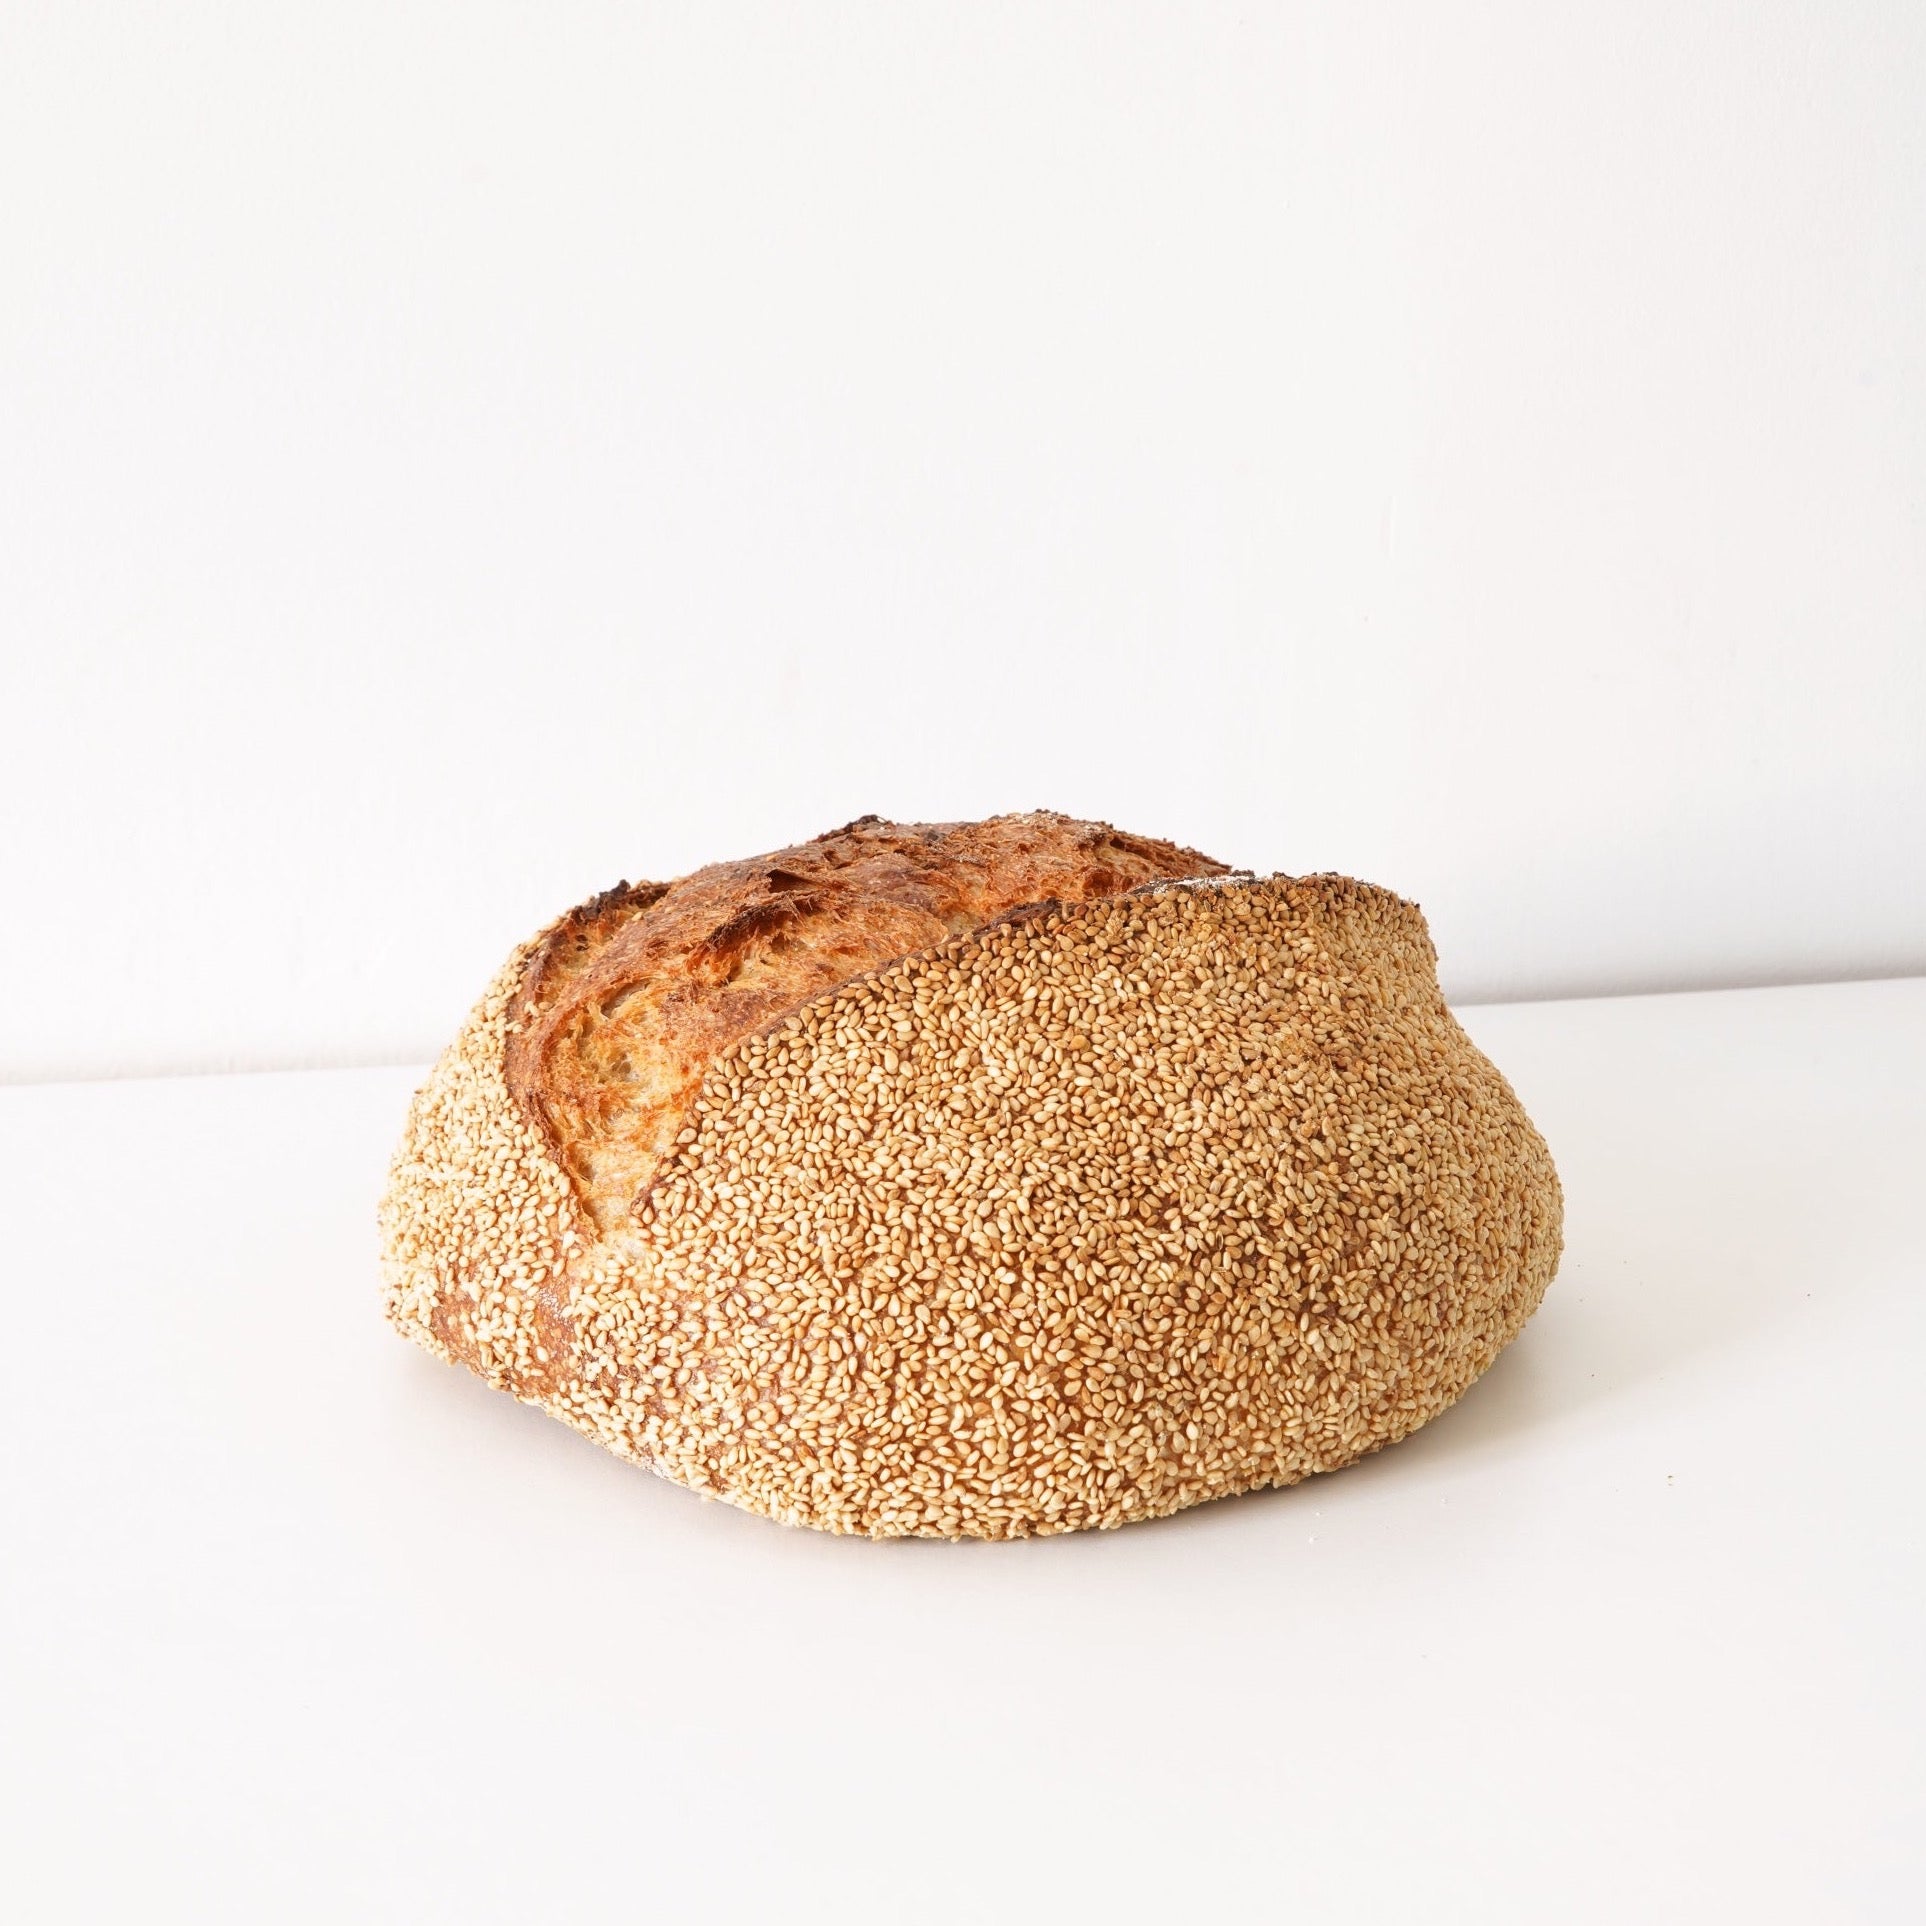 full image a light brown sourdough loaf that has been covered fully in sesame seeds